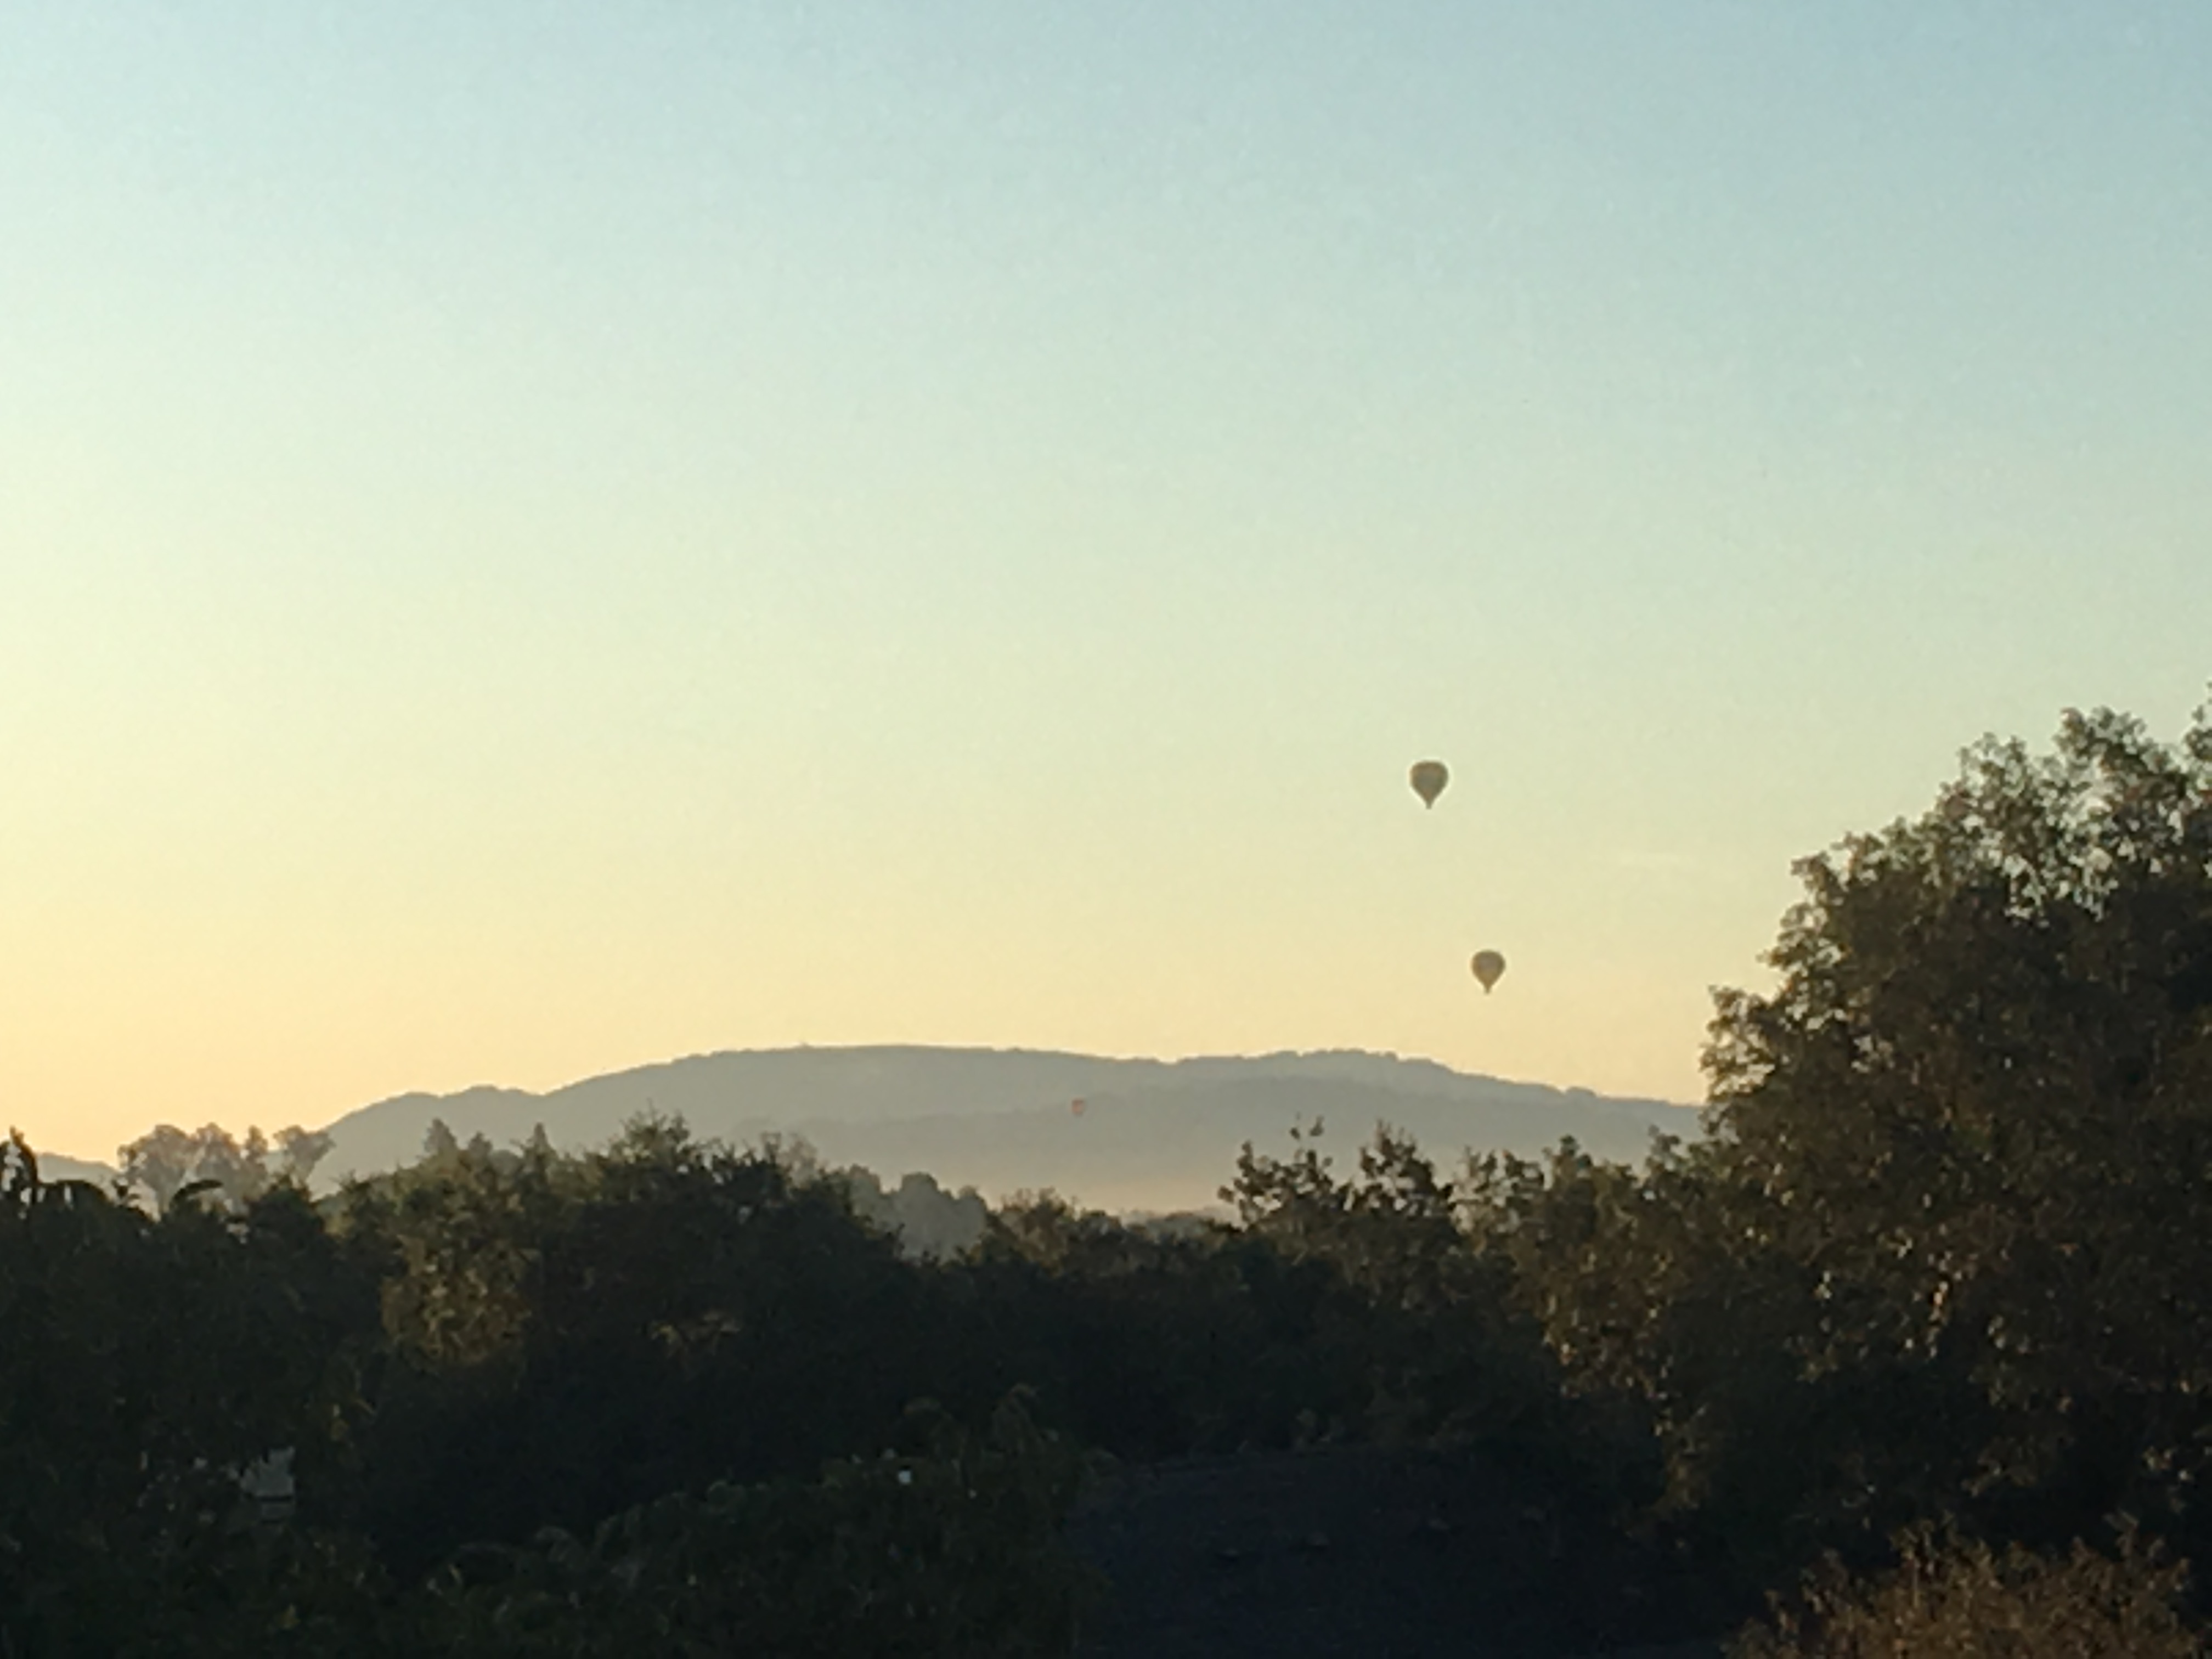 Two hot air balloons in the sky over trees and hills, against a pale morning sky.